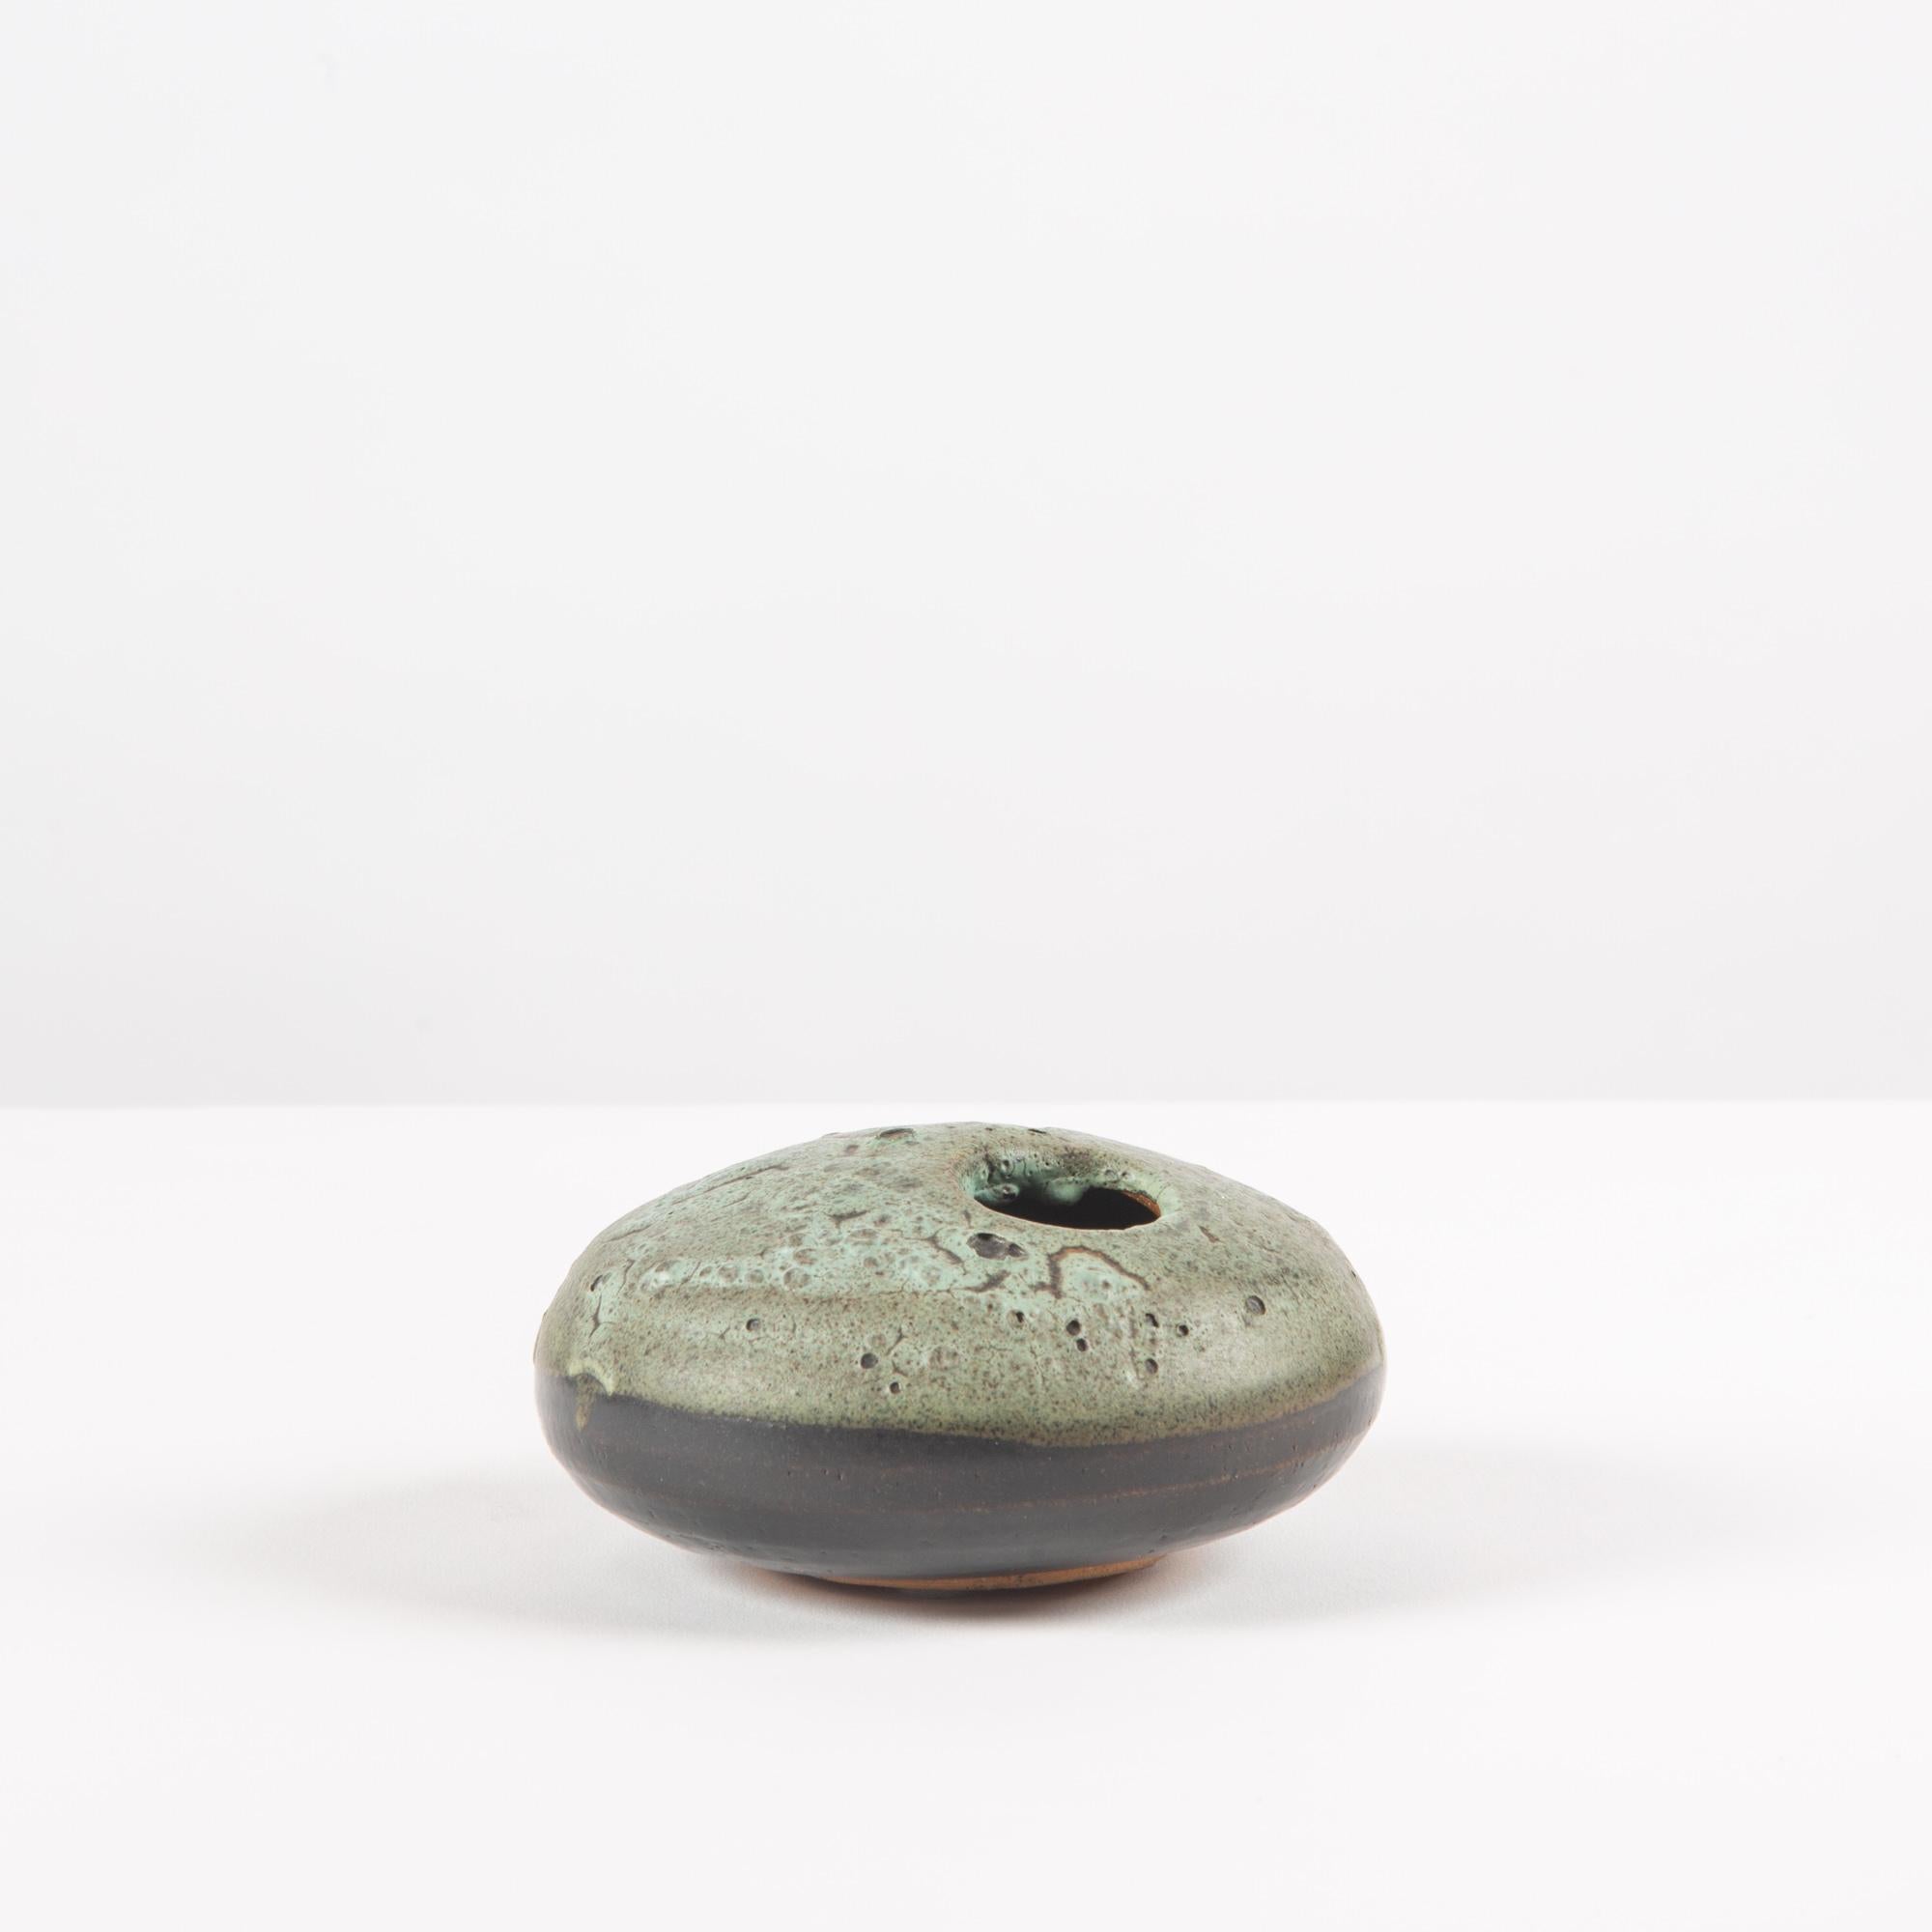 Petite round vessel features a two-tone glaze in seafoam and dark forest green. The top of the vessel is textured with a round opening off center to hold a few buds. Artist signature on the underside.

Dimensions: 4.75?